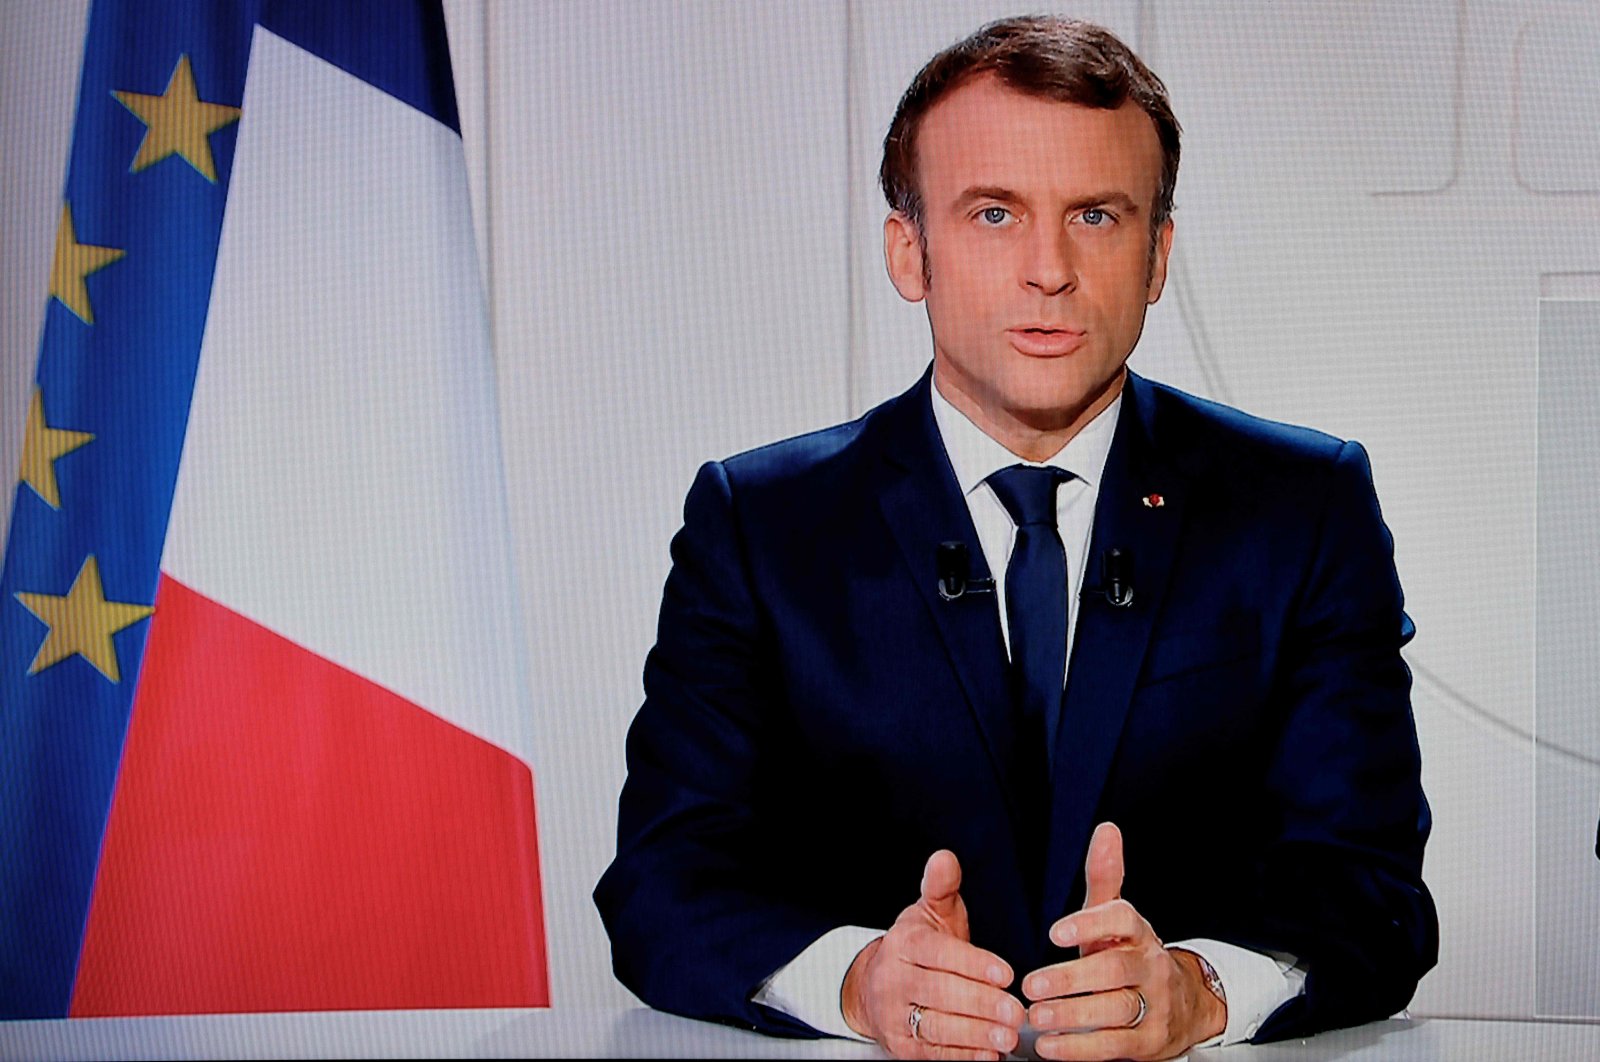 French President Emmanuel Macron addresses the nation from a TV screen at the Elysee palace, after the third independence referendum in New Caledonia, Paris, France, Dec. 12, 2021. (AFP Photo)